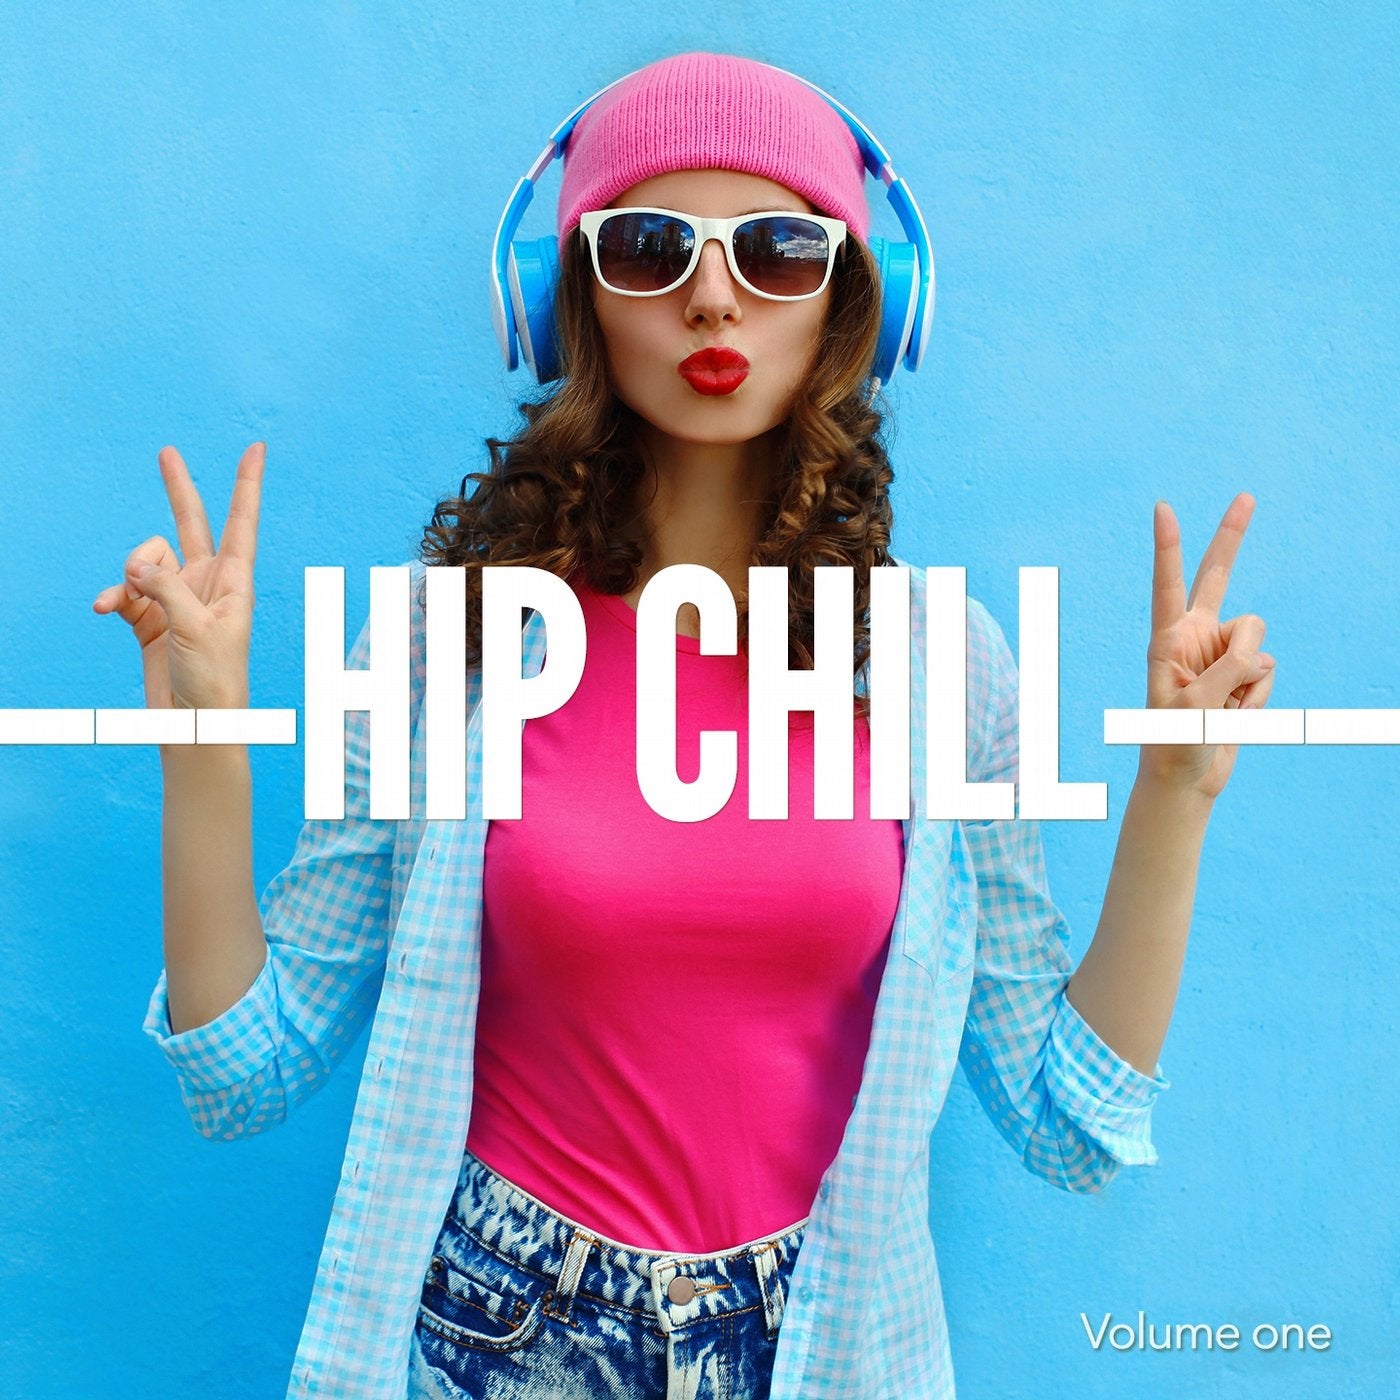 Hip Chill, Vol. 1 (Cool Relaxing Music)